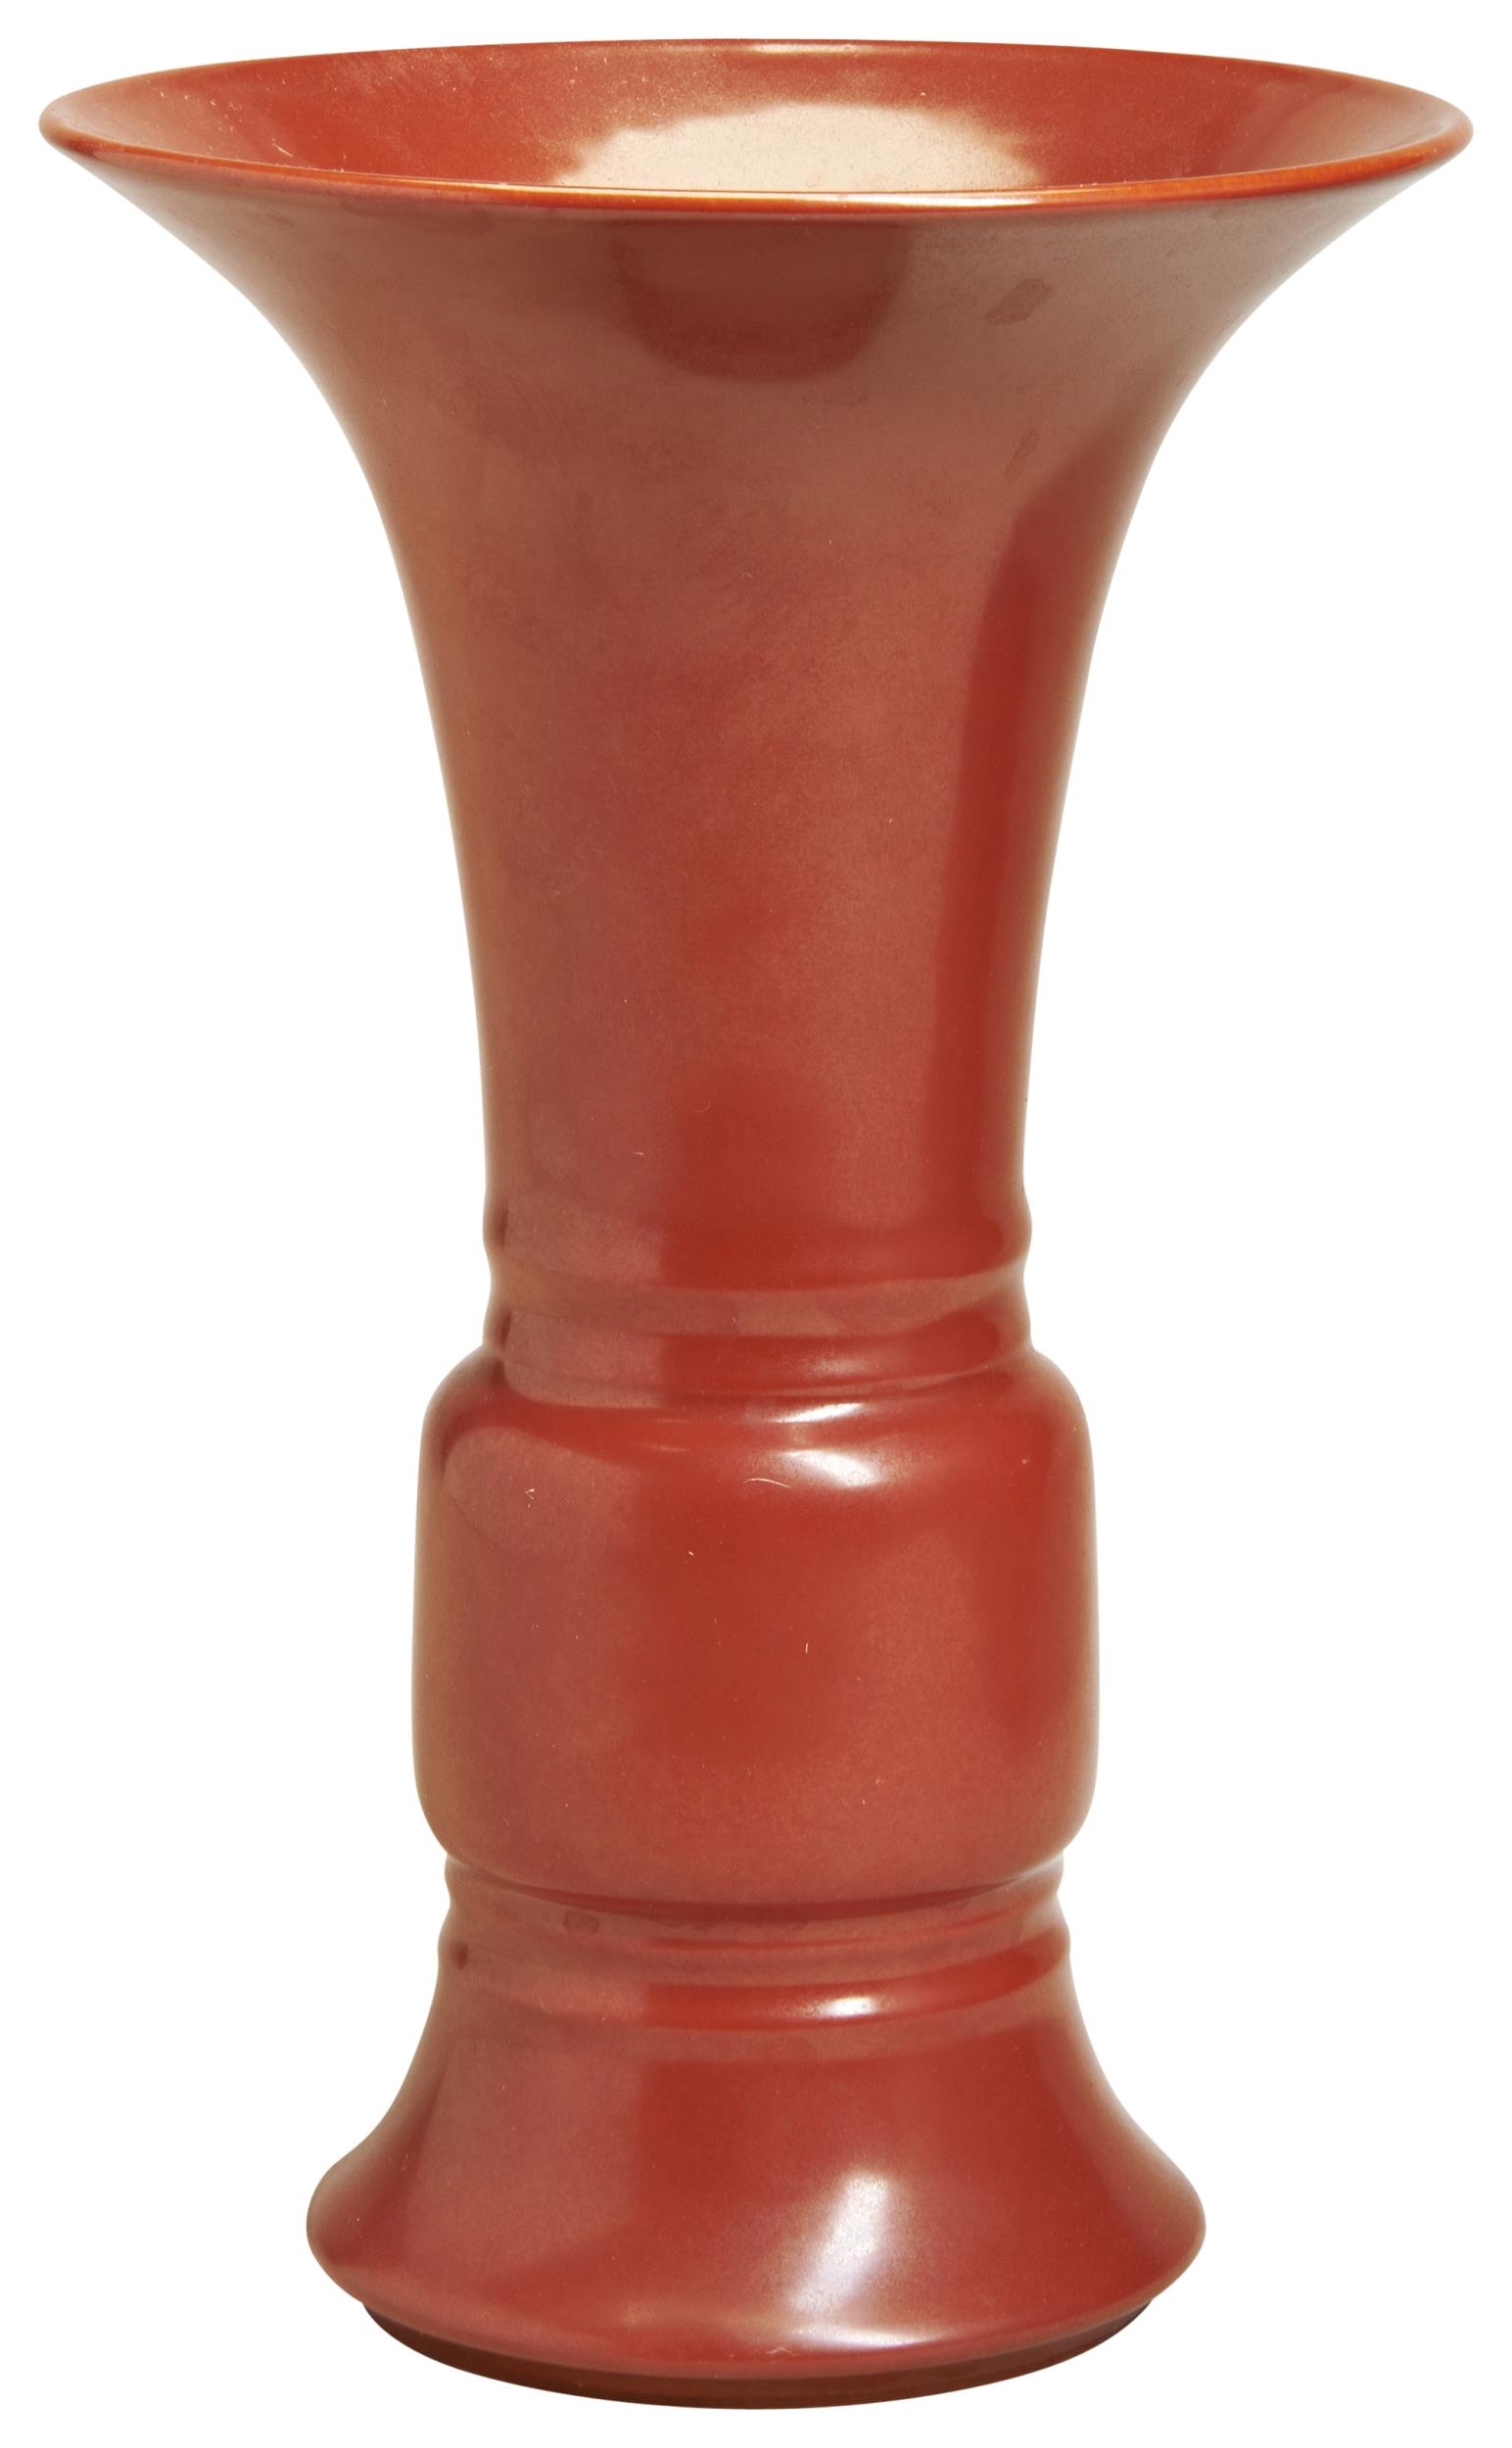 A CORAL-RED GU FORM VASE LATE QING / REPUBLIC PERIOD  covered all over in a rich coral-red glaze,